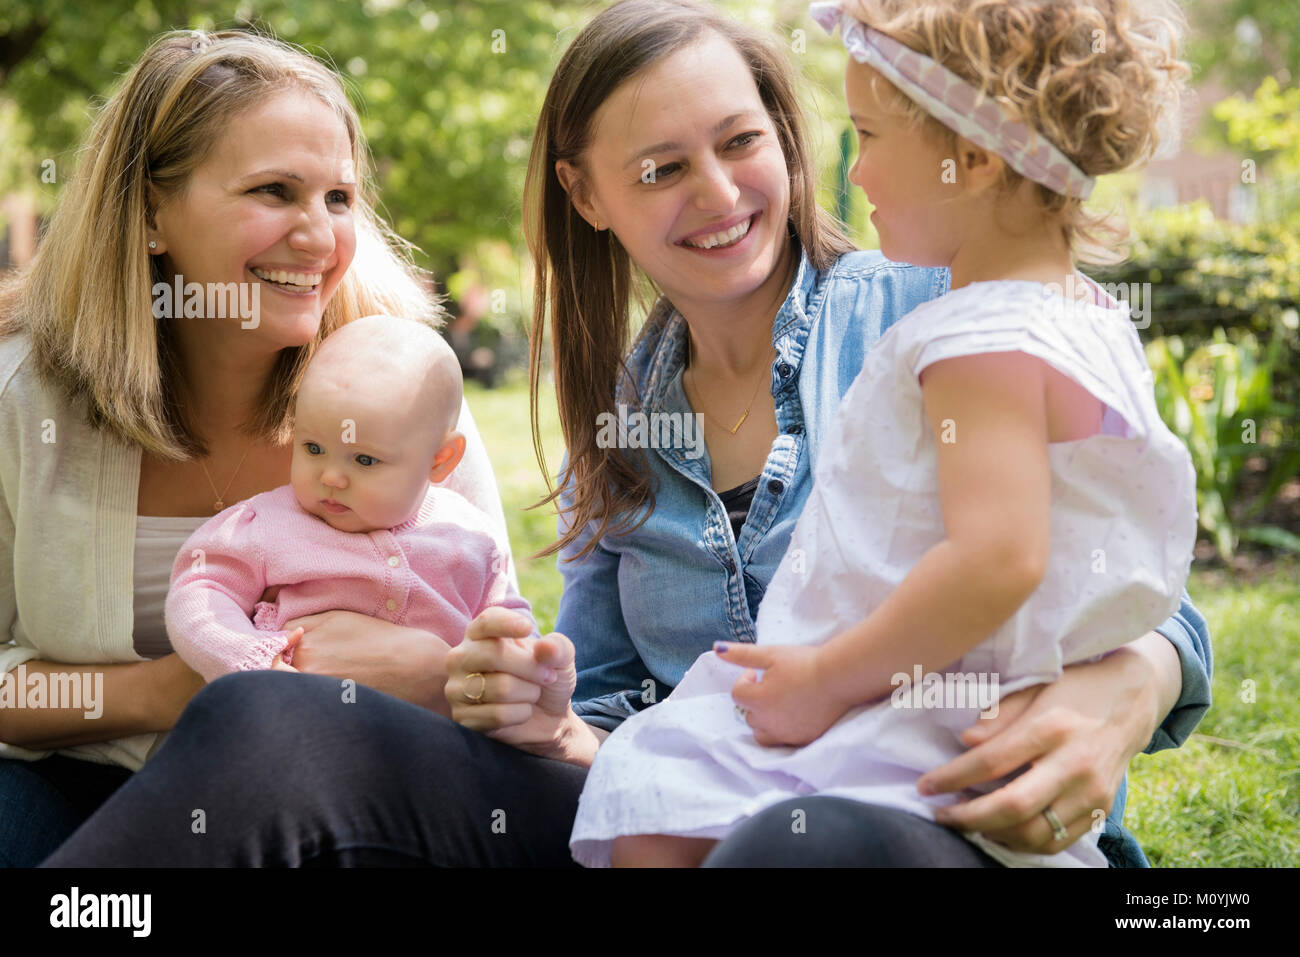 Caucasian mothers and daughters smiling in park Stock Photo